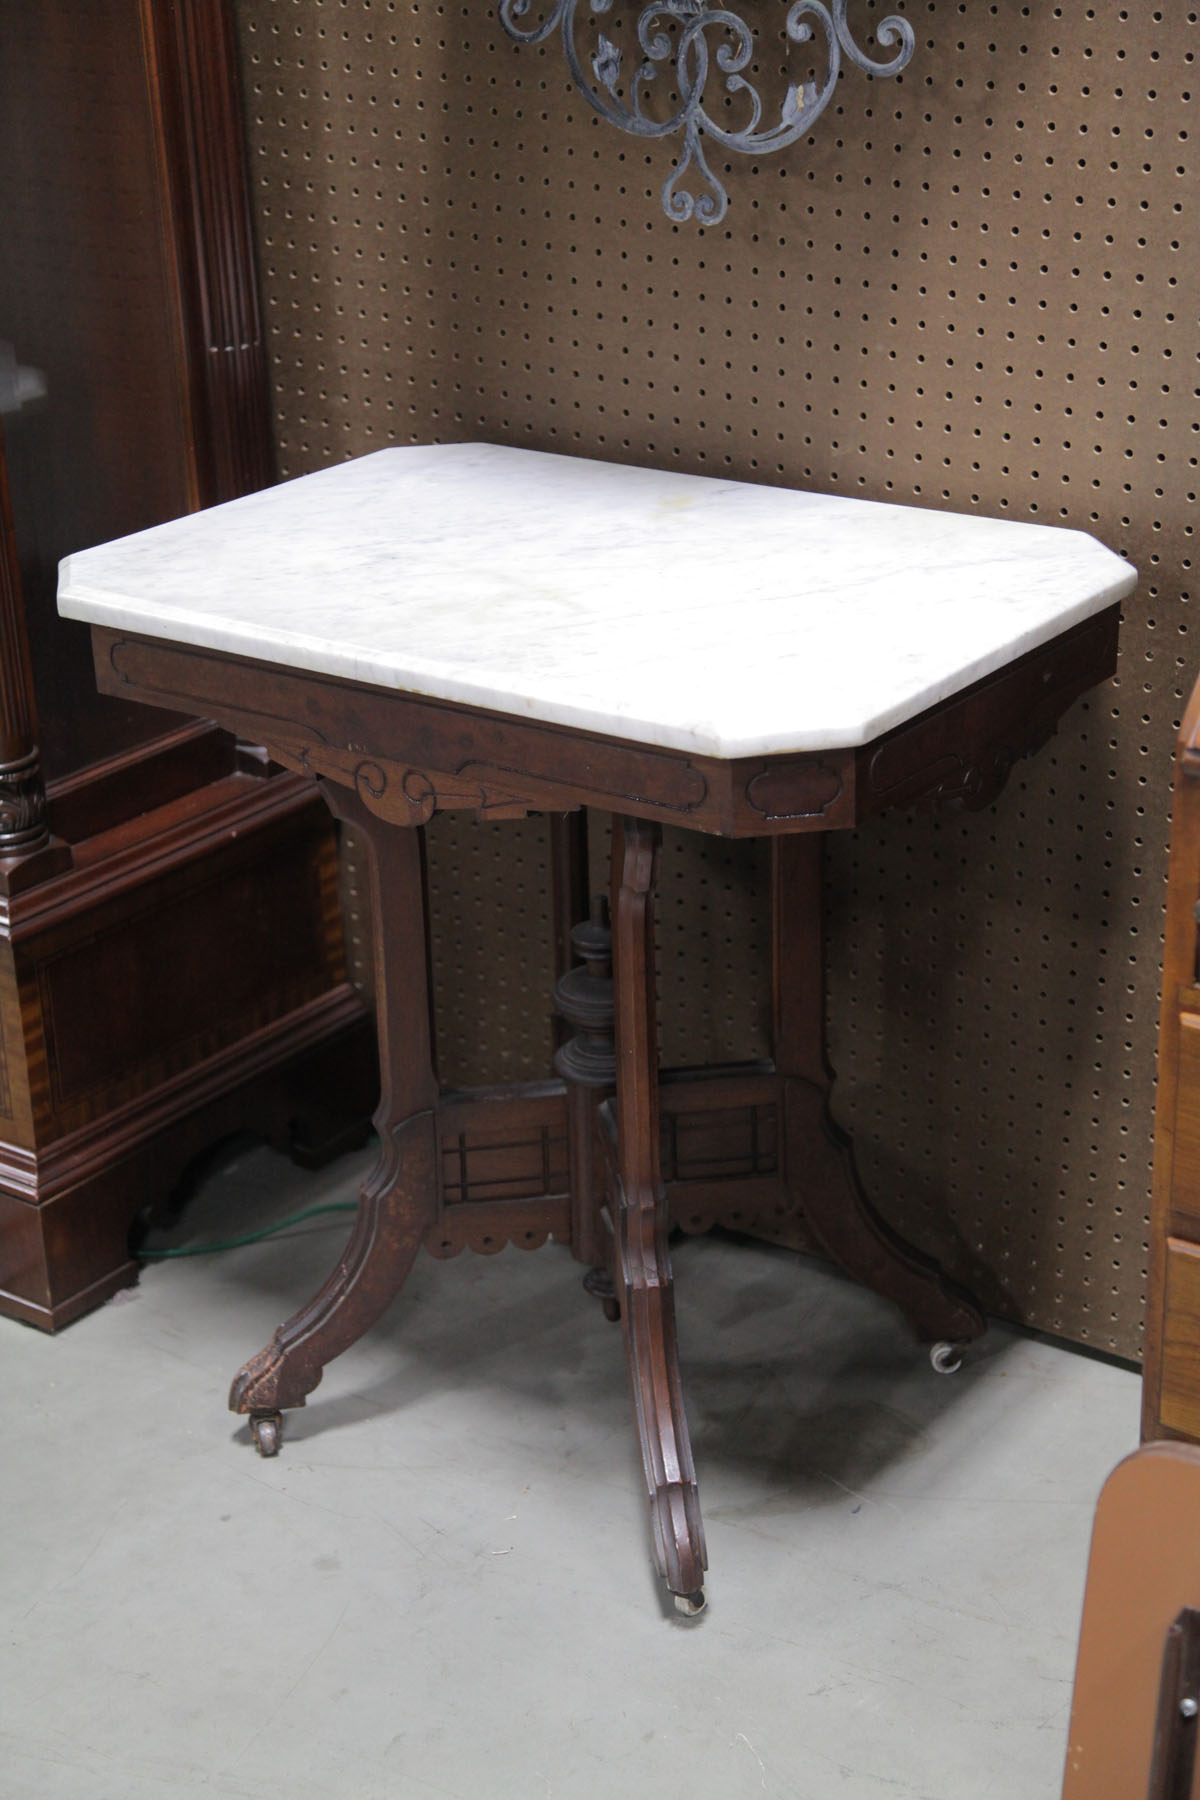 VICTORIAN PARLOR STAND.  American